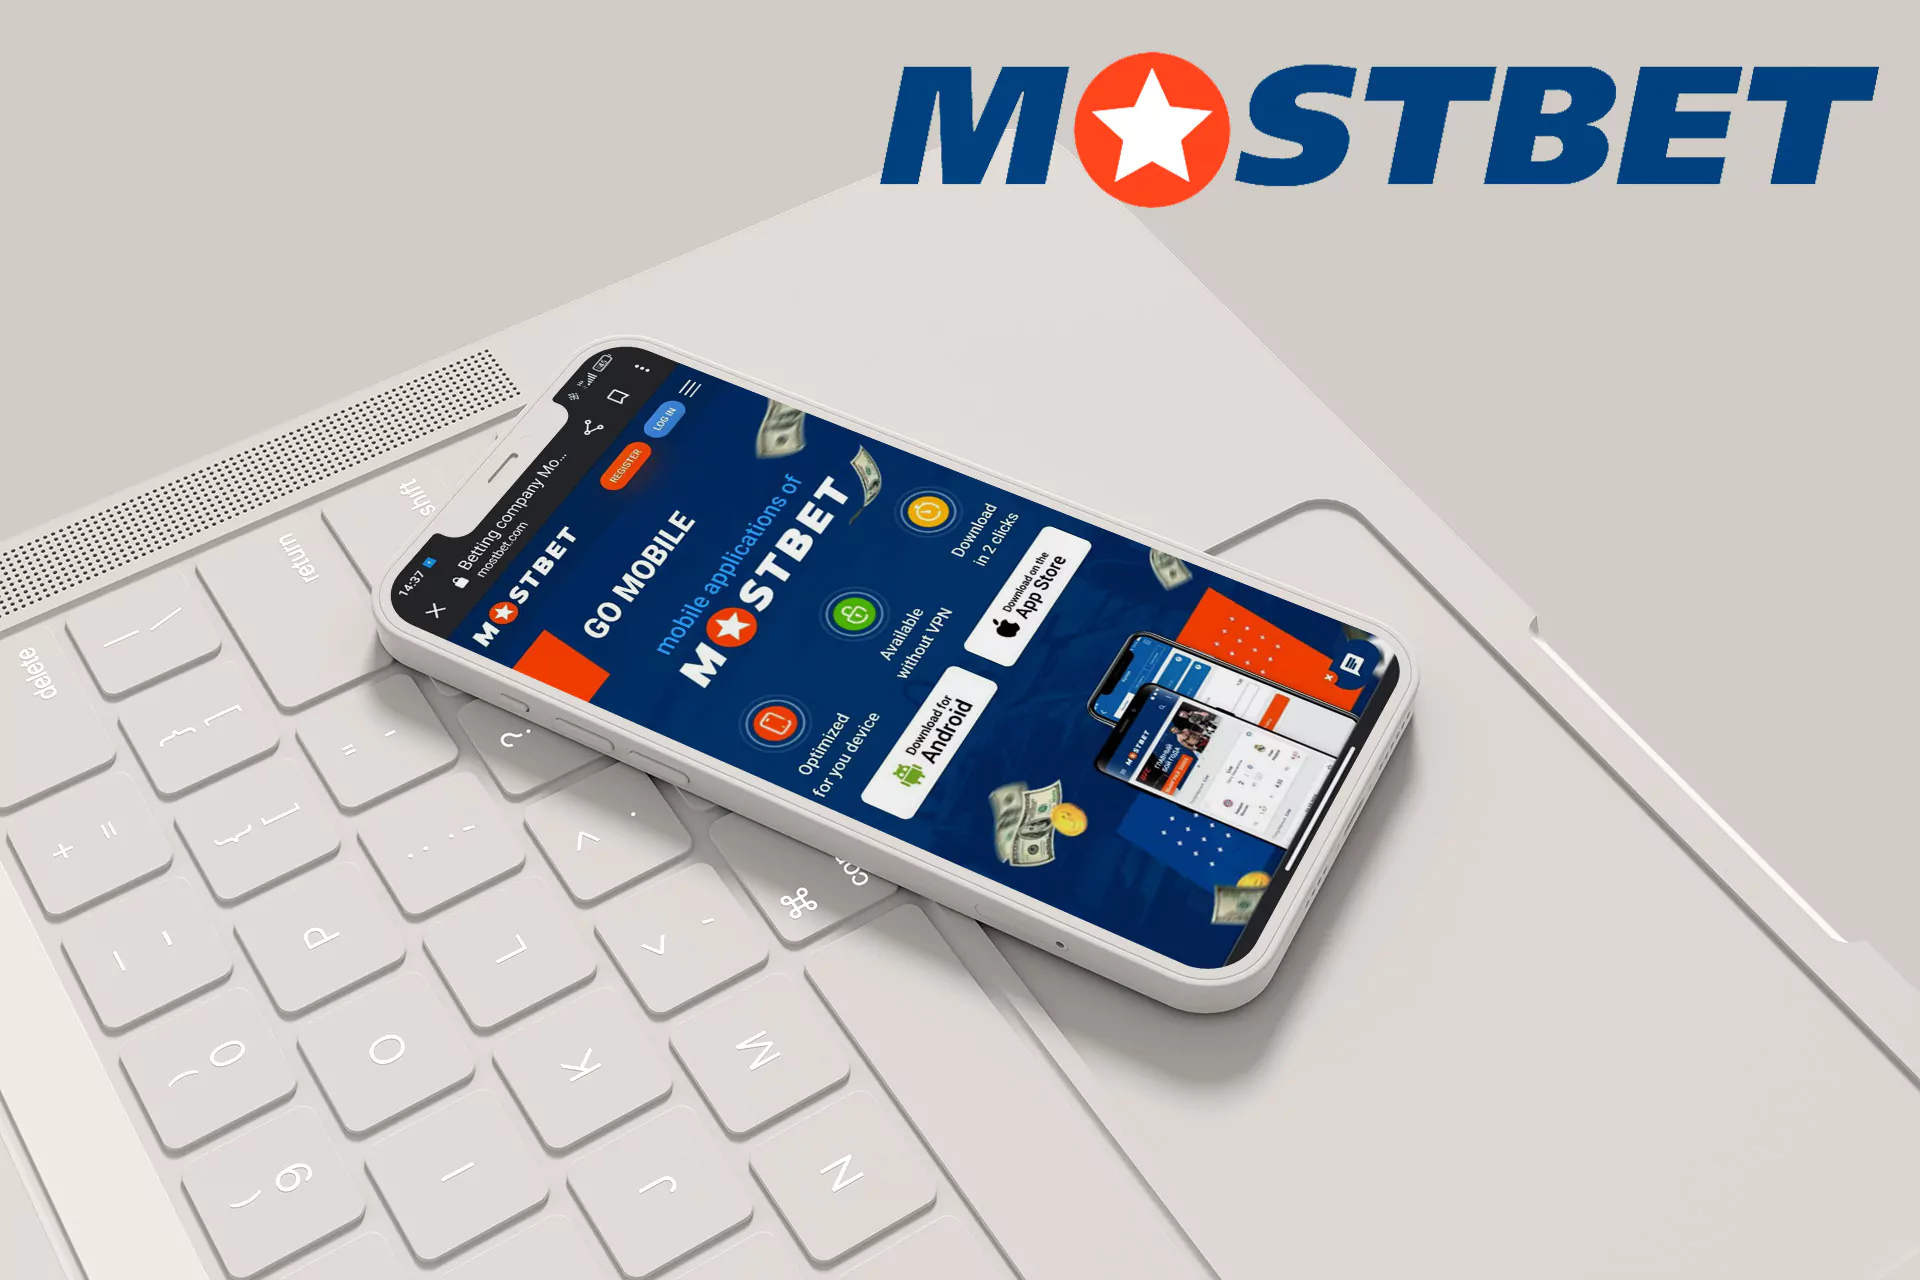 If you do not want to download the app you can use Mostbet via the mobile browser.